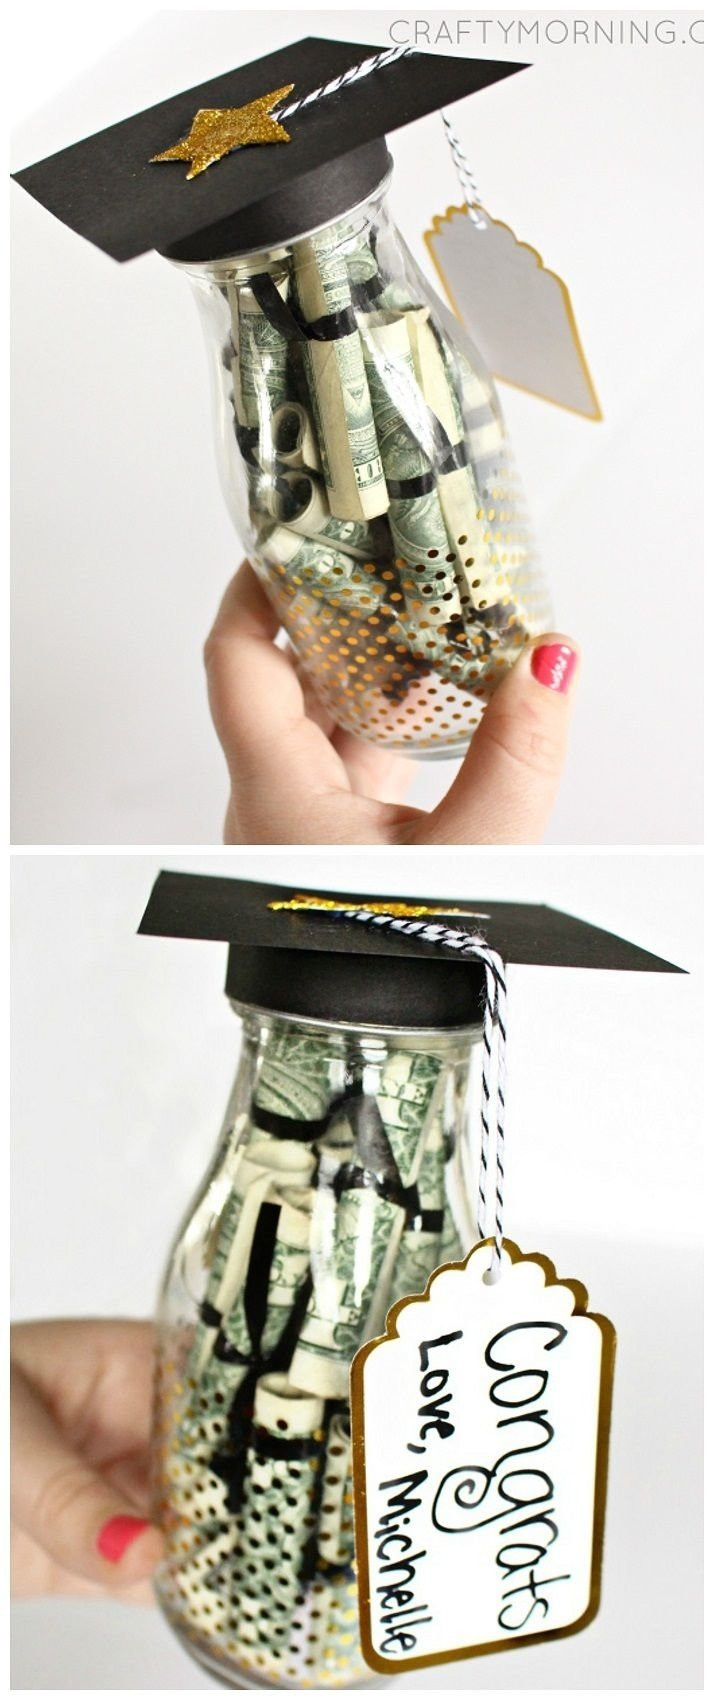 Graduation Gift Ideas For Son
 10 Most Popular High School Graduation Gift Ideas For Son 2019